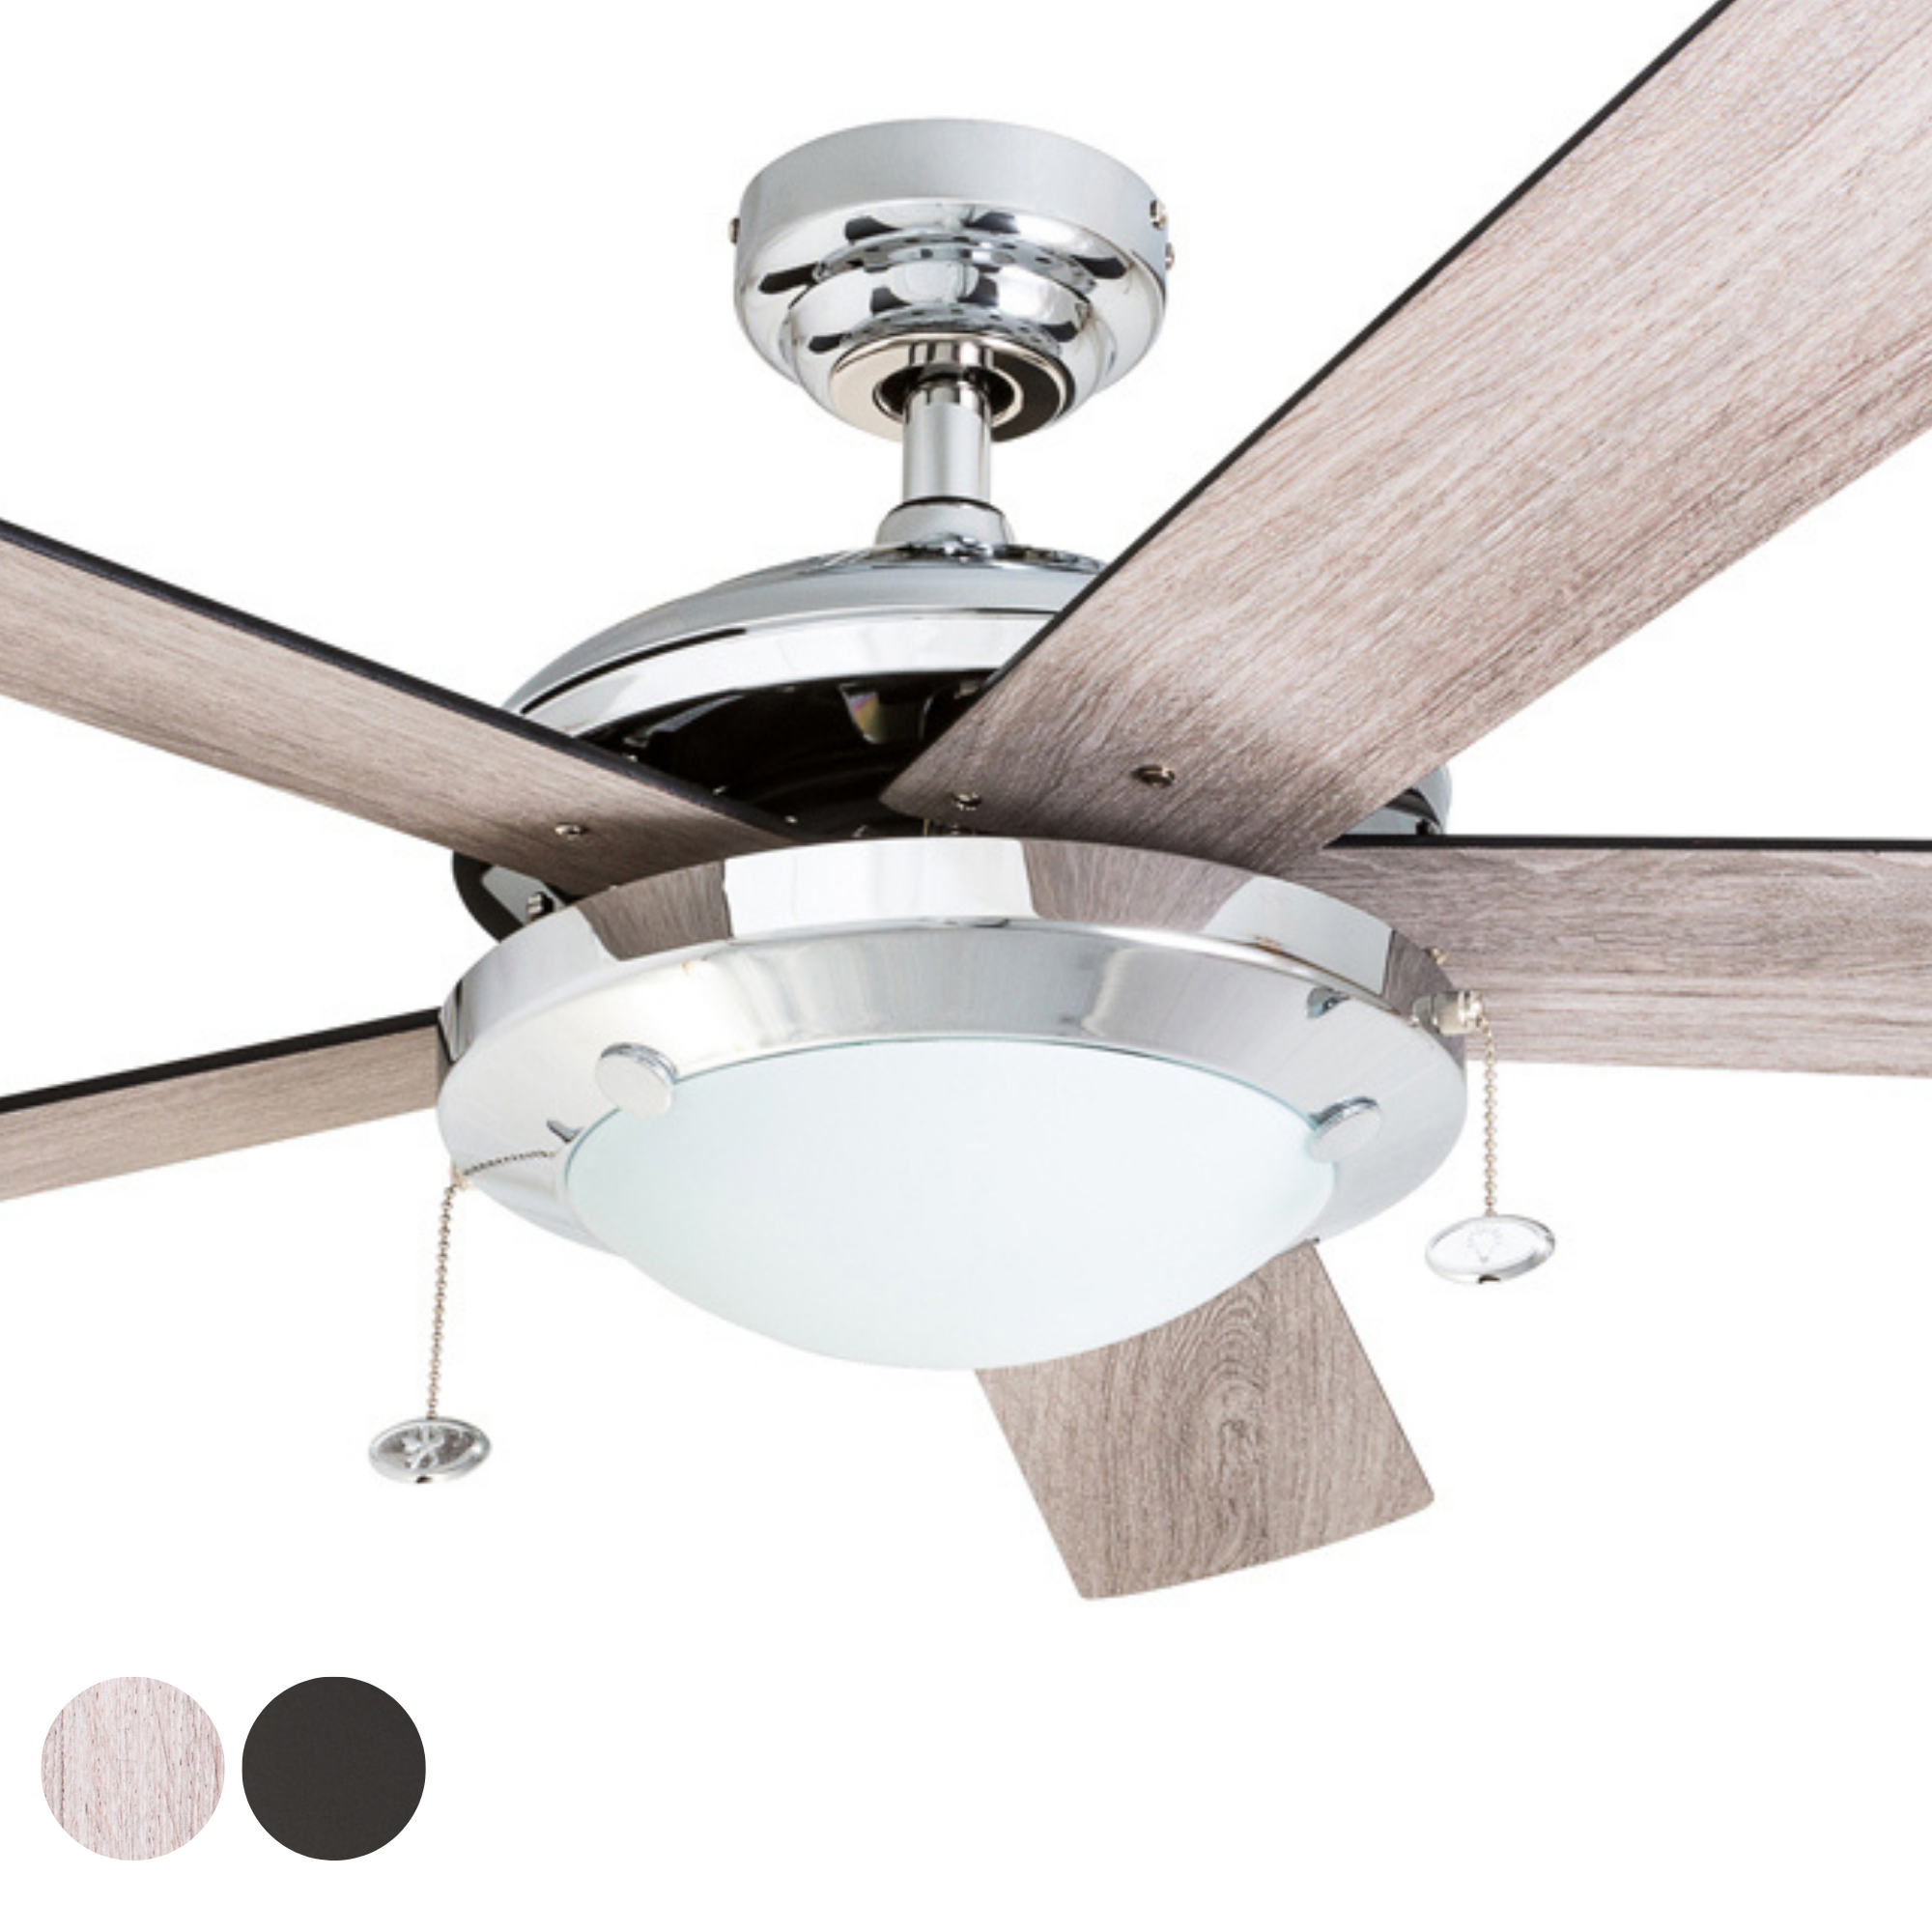 52 Inch Bolivar, Chrome, Pull Chain, Ceiling Fan by Prominence Home